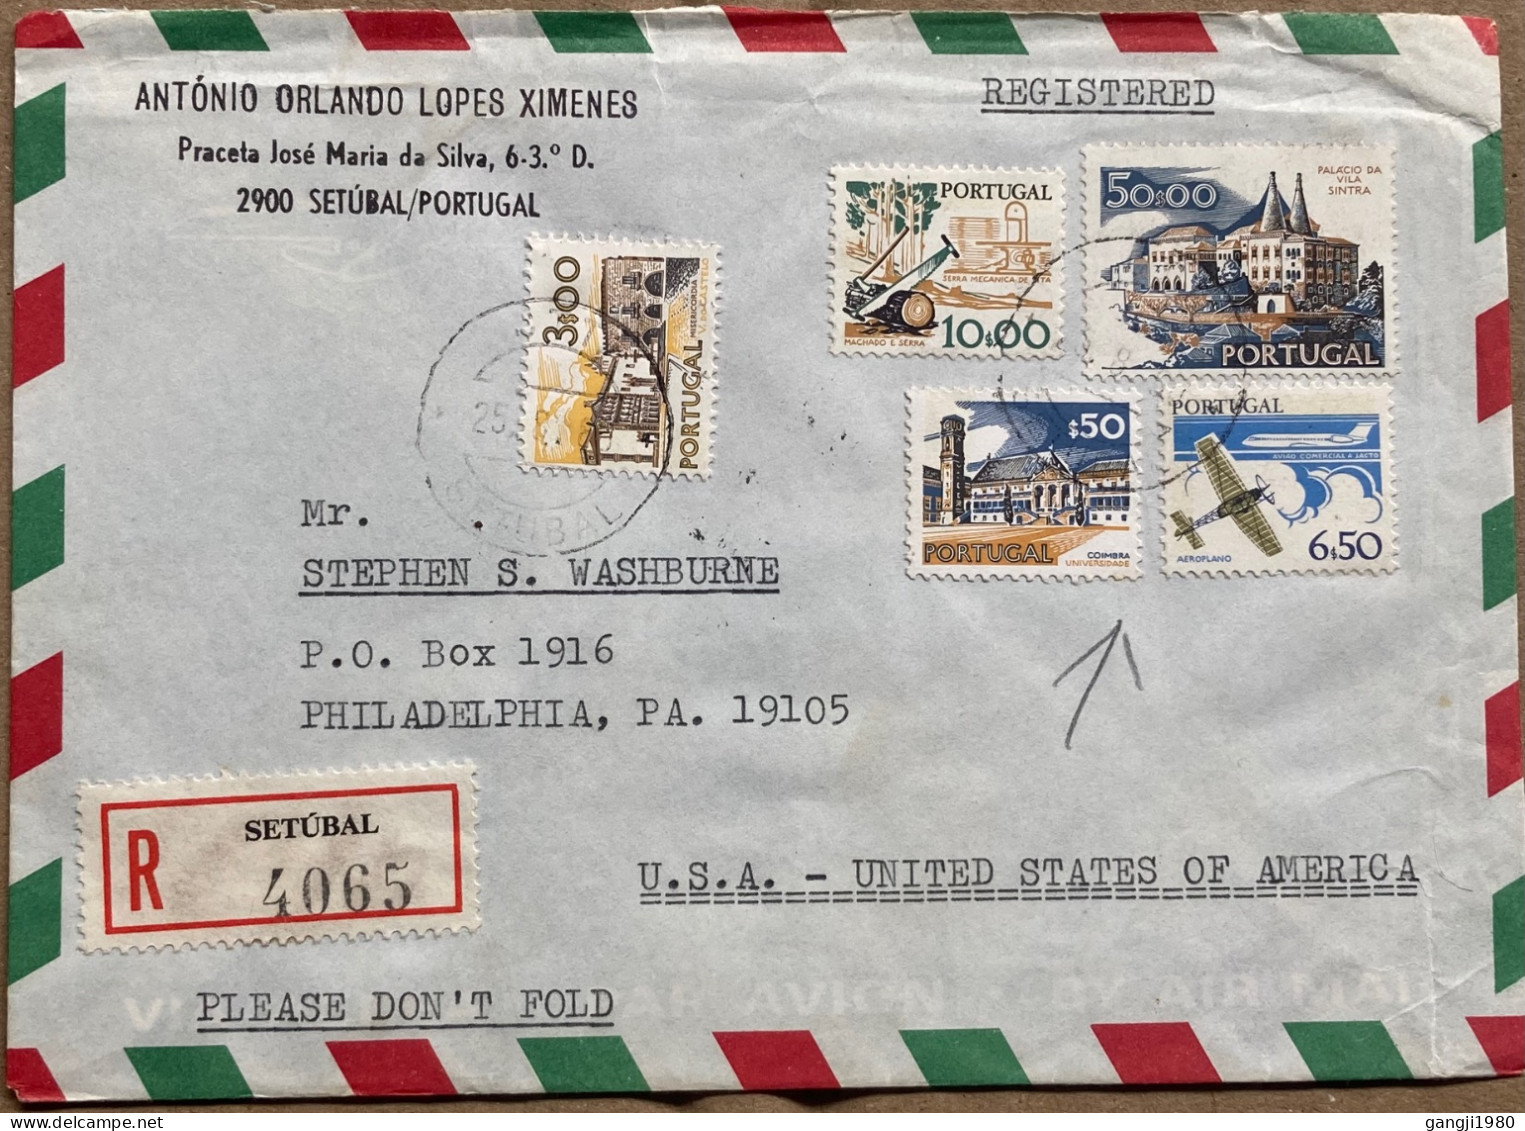 PORTUGAL 1980, REGISTER COVER, USED TO USA, SETUBAL CITY, 5 DIFF STAMP, SAN AXE, SINATRA VILLA BUILDING, HERITAGE, AEROP - Lettres & Documents